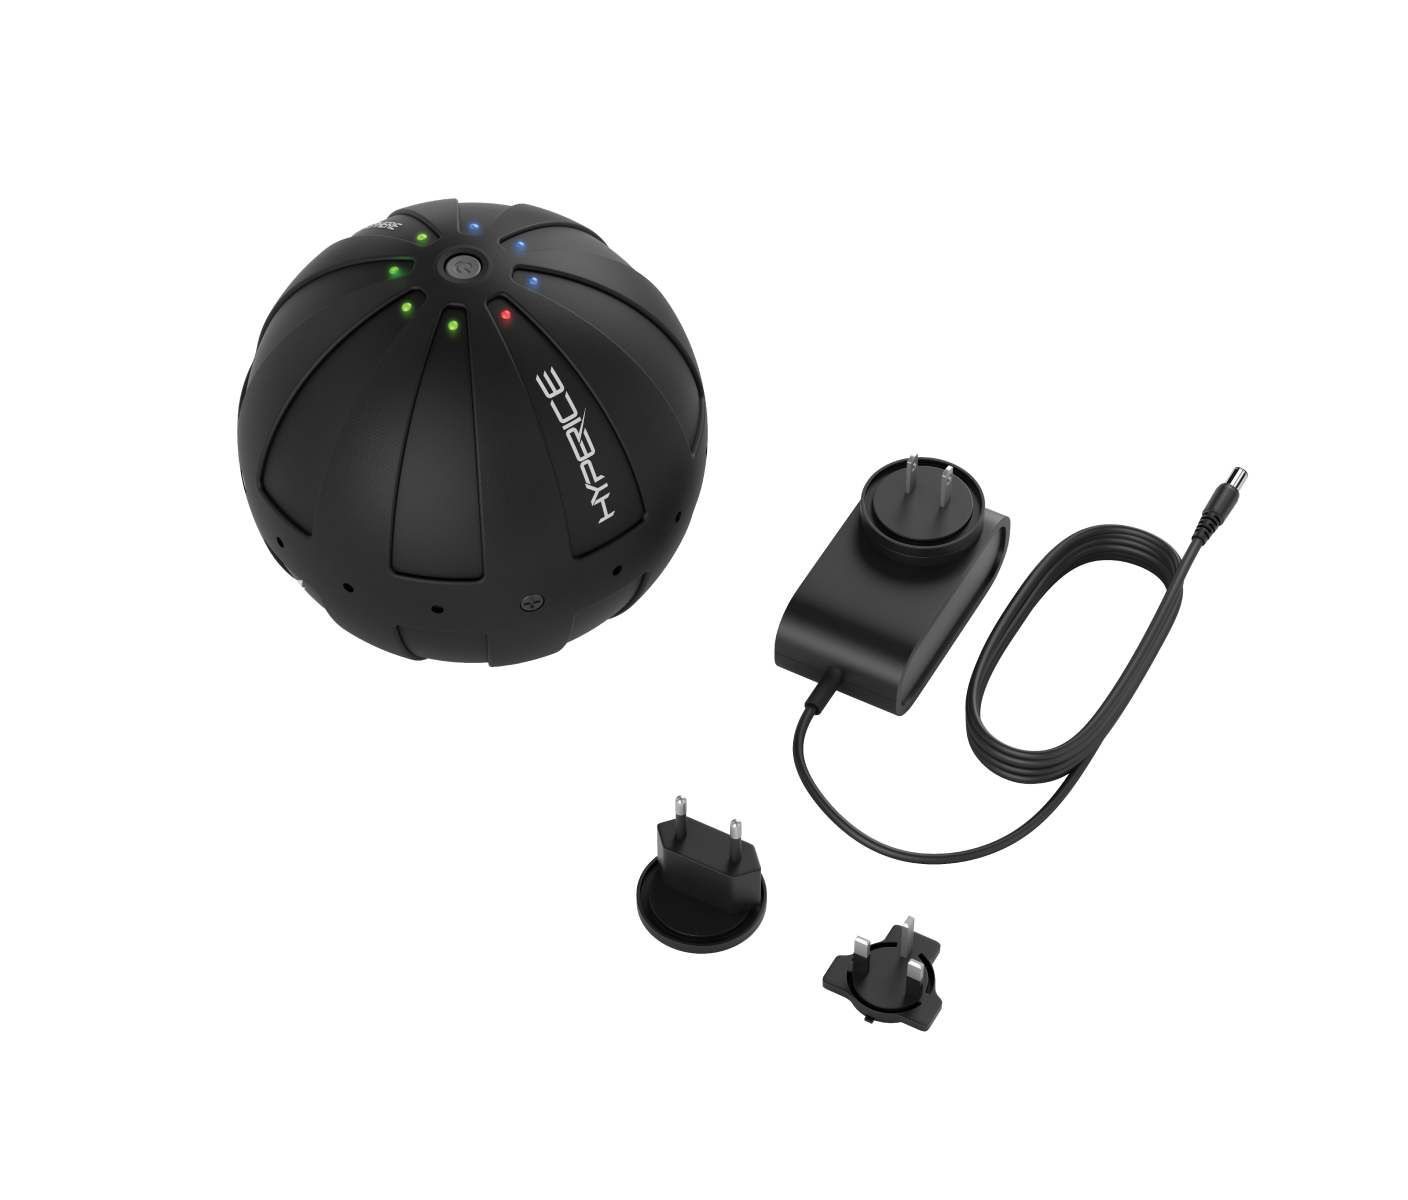 What’s included with your Hypersphere